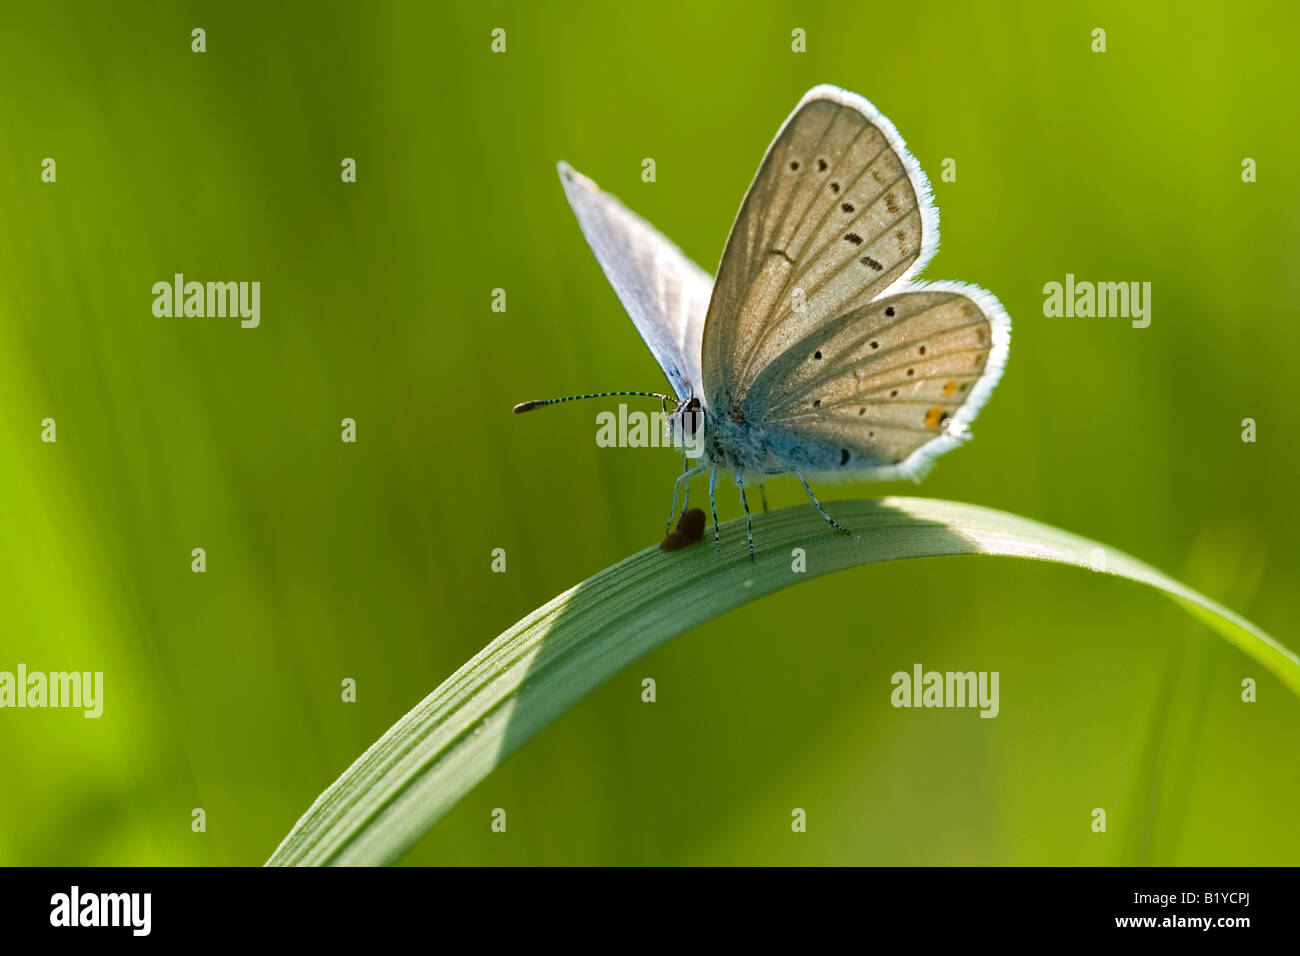 Blue butterfly on a blade of grass Stock Photo